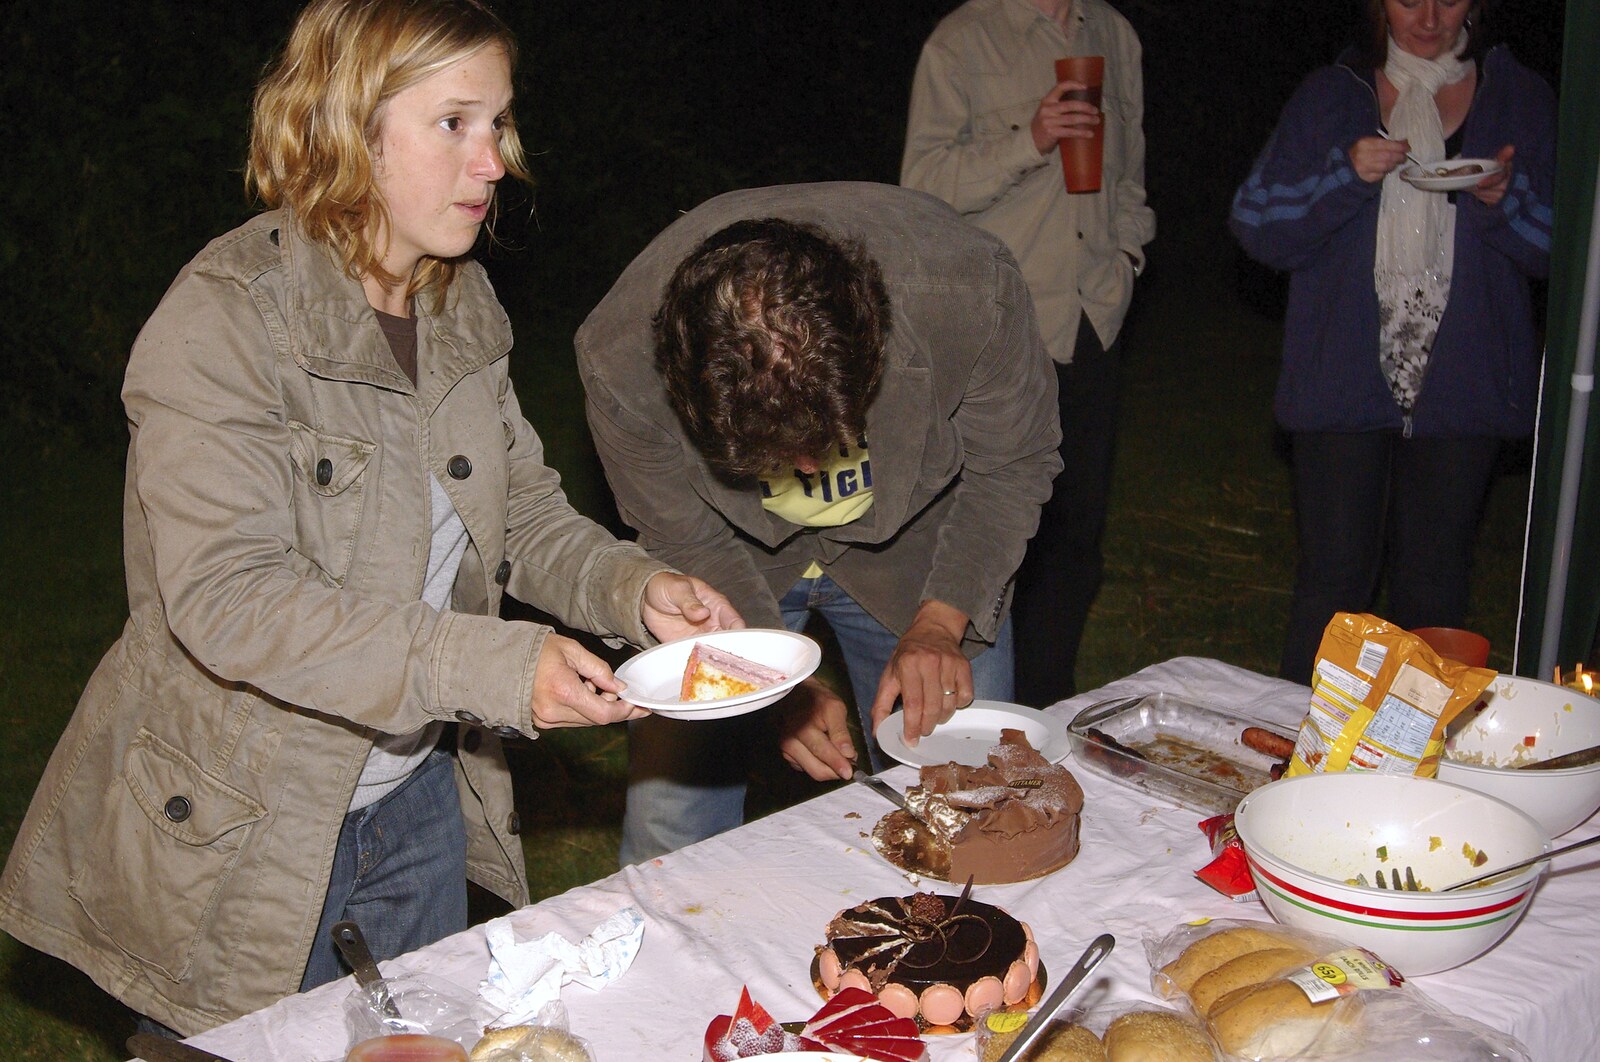 Bromestock Three, Brome, Suffolk - 18th August 2007: Jules hands out cake, as Pieter cuts slices